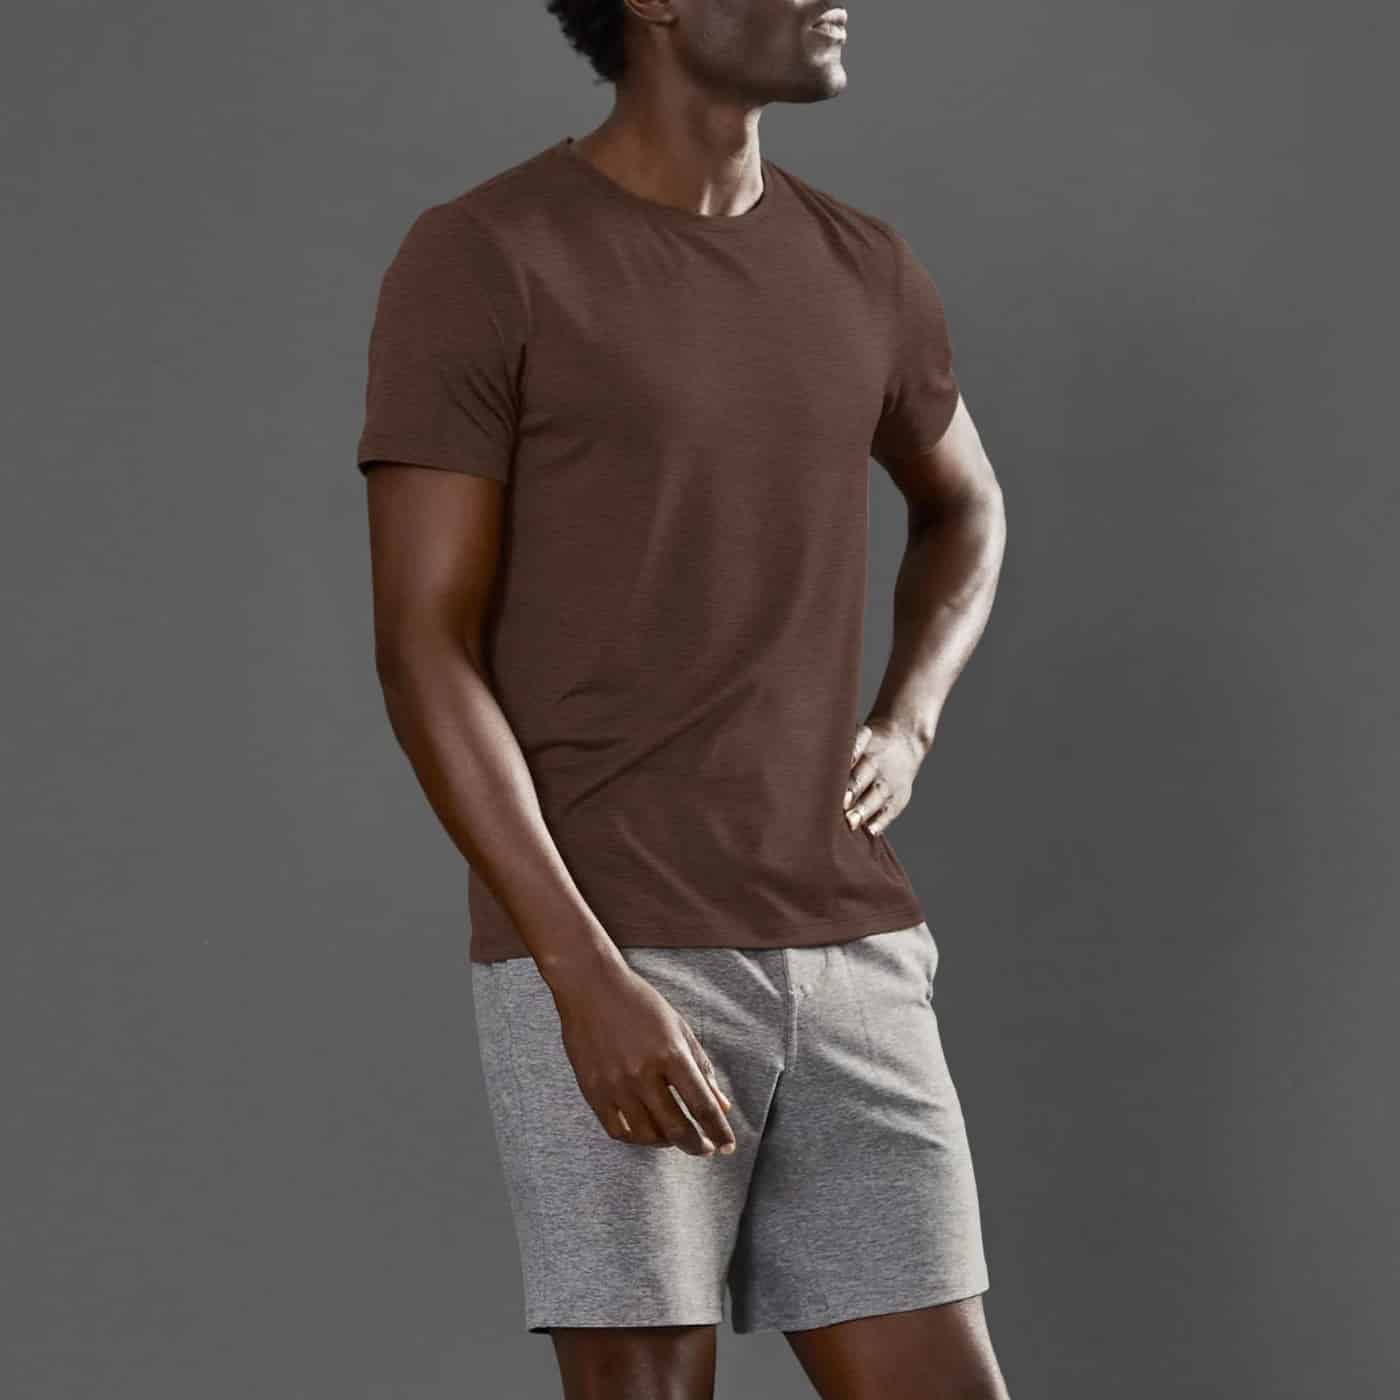 Best Yoga Clothes for Men: 5 Brands You Must Know in 2023